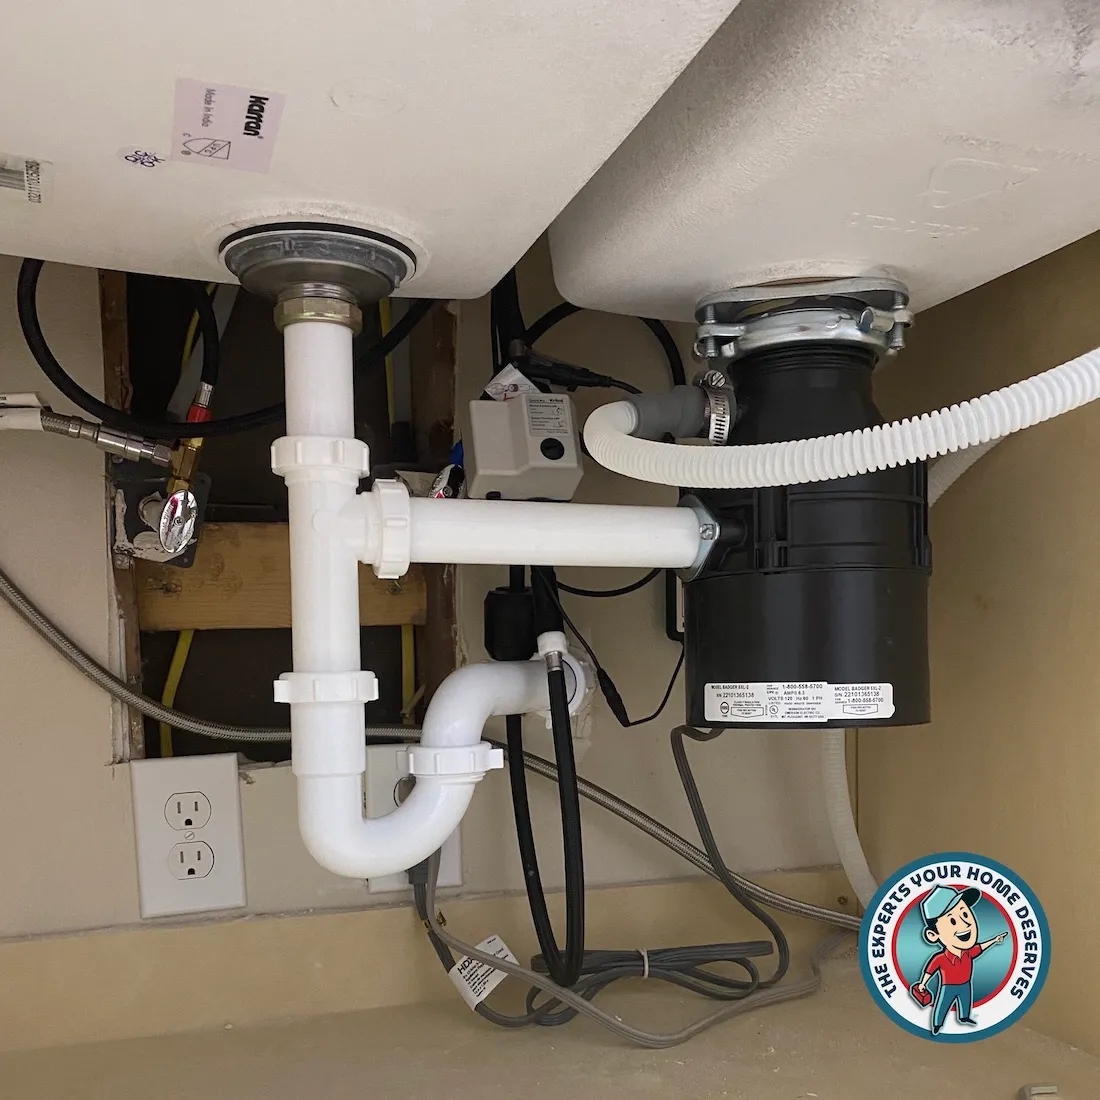 New garbage disposal and new drain kit installed in the kit